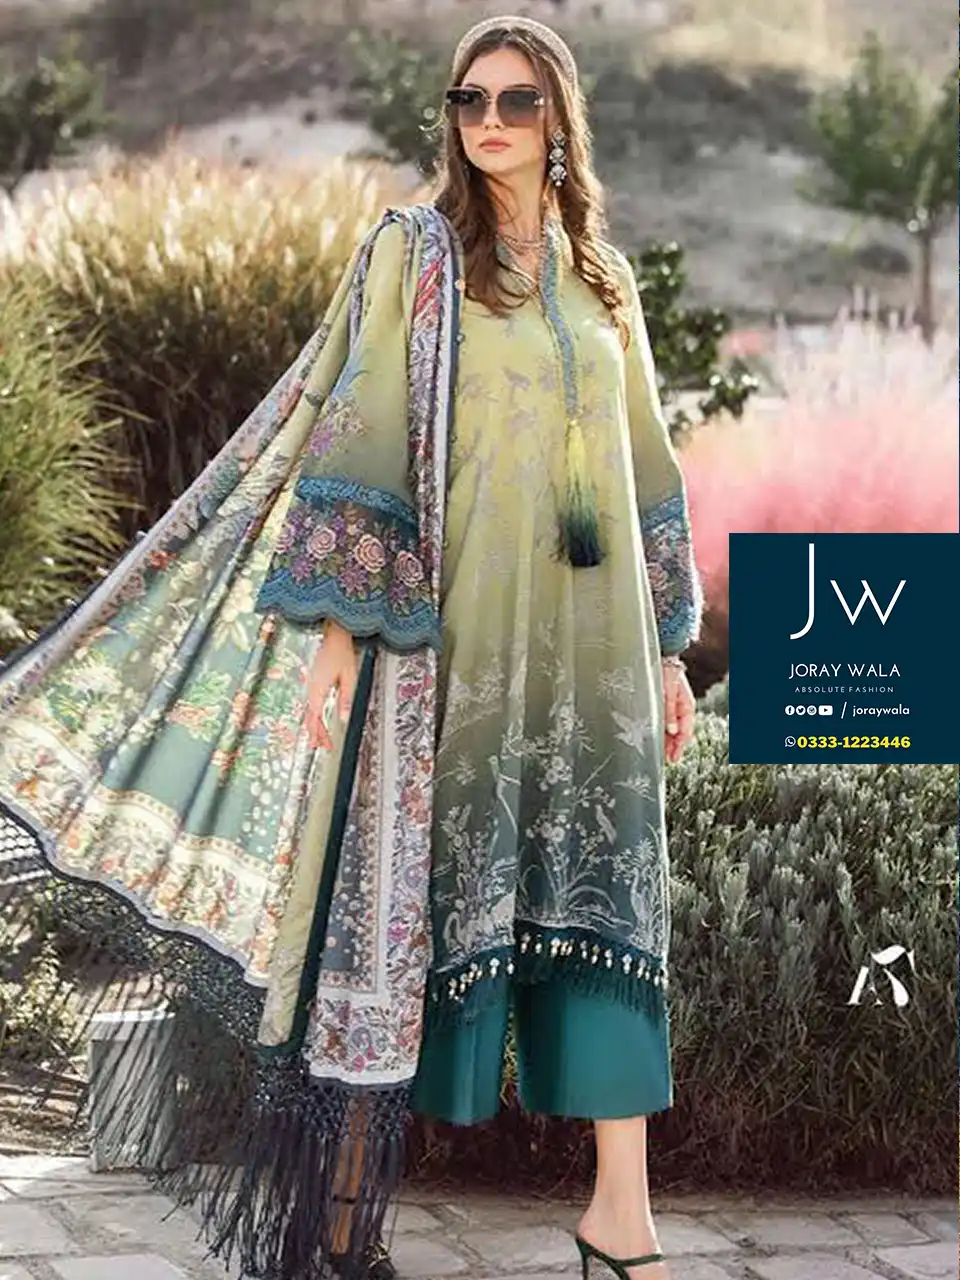 Model wearing a maria b Luxury lawn collection suit and standing in a garden, the suit has a beautiful combination of seagreen and green color